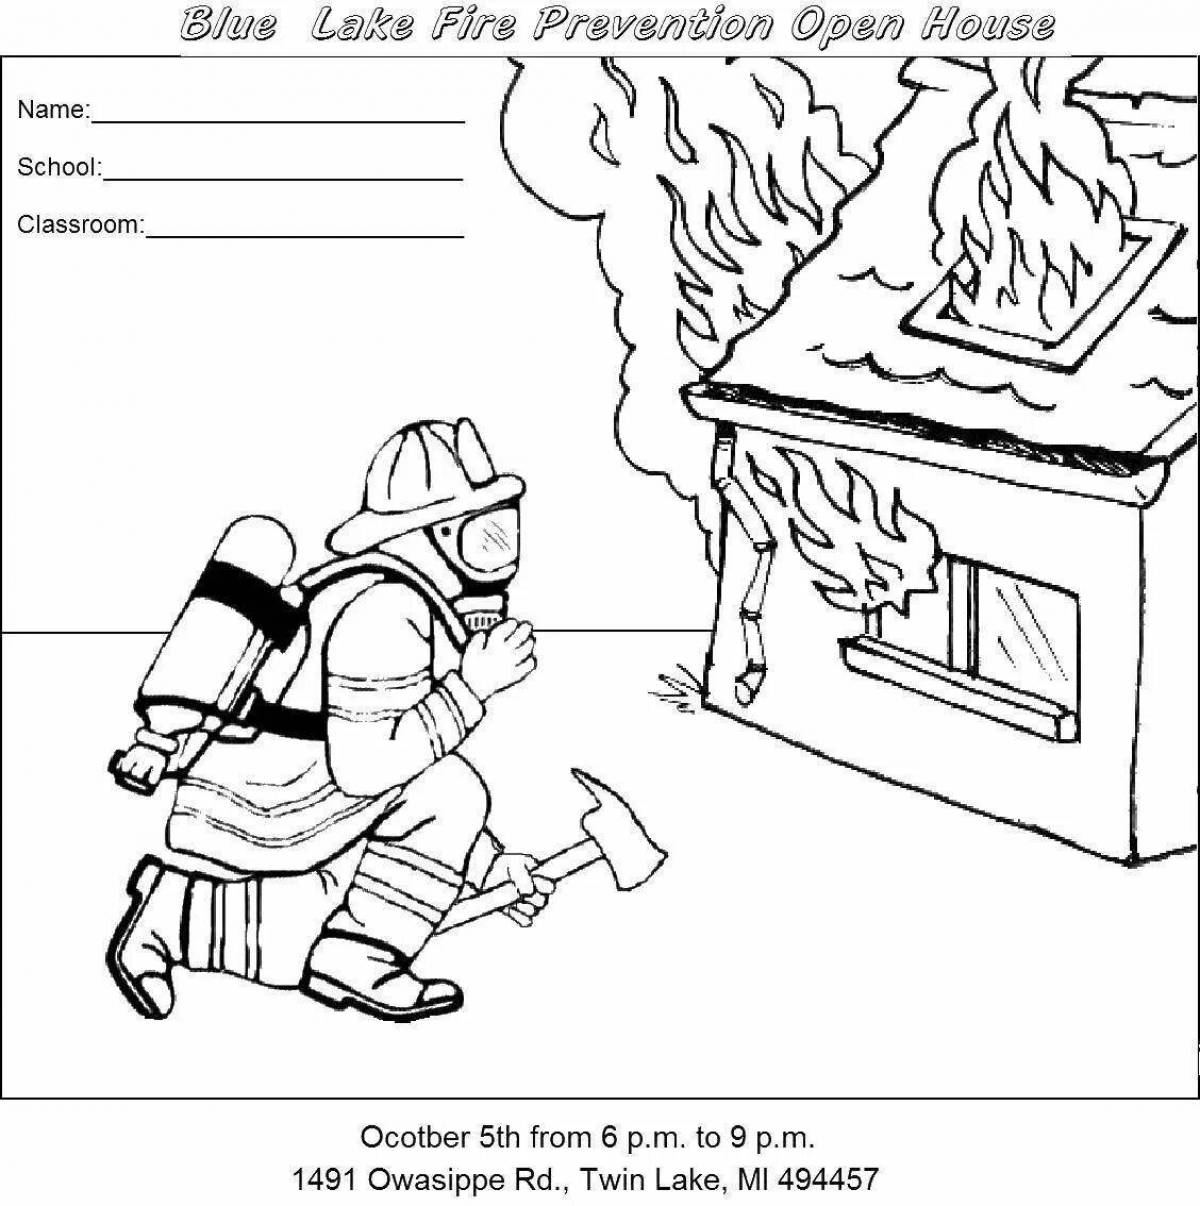 Dramatic drawing of fire safety